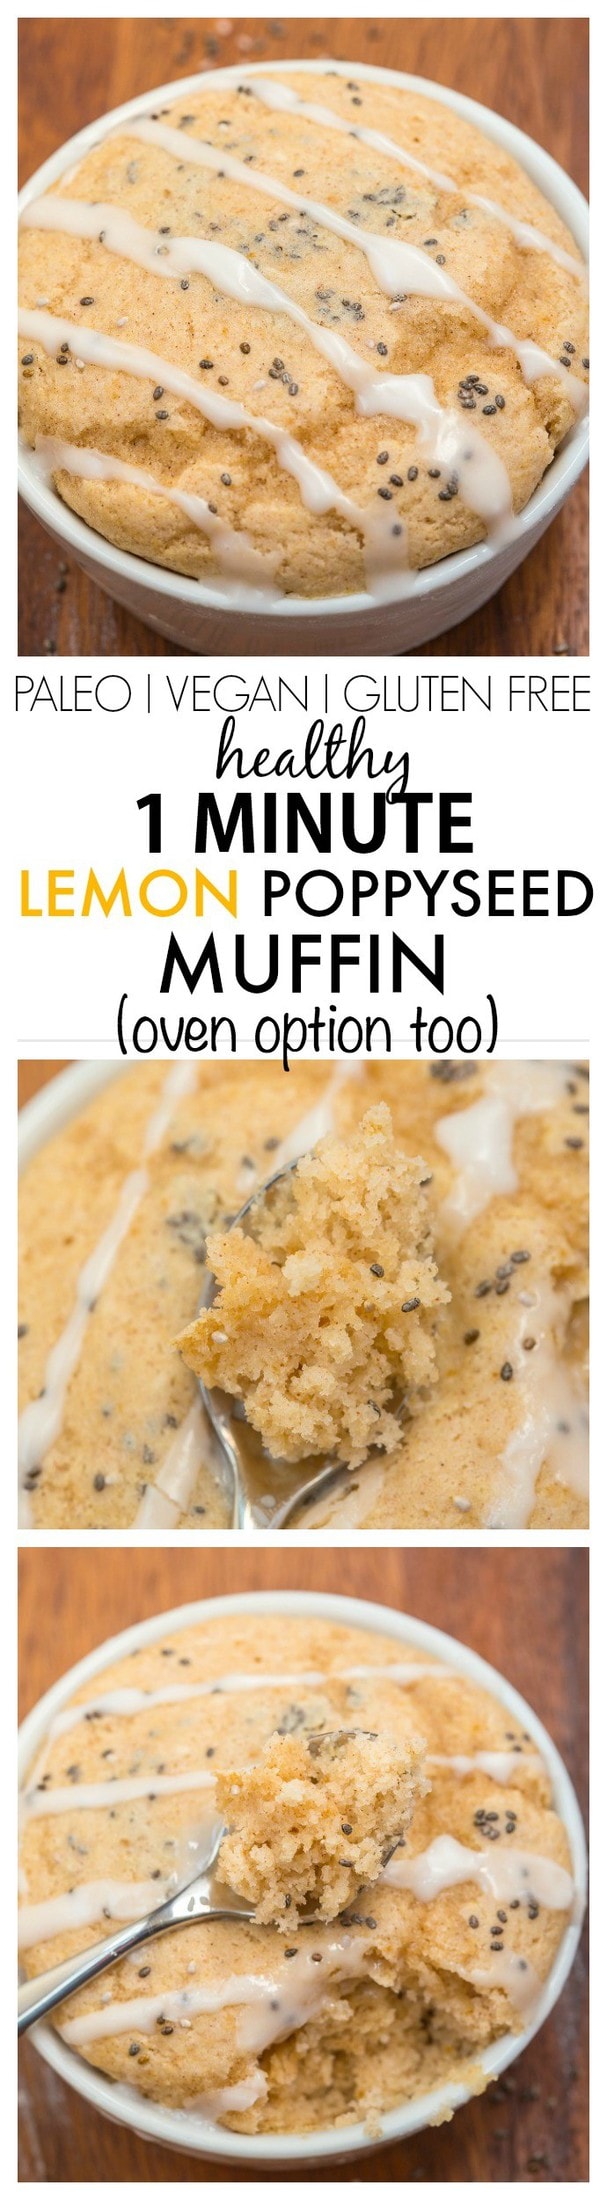 Healthy 1 minute Lemon Poppyseed Muffin- Moist and fluffy on the inside and tender on the outside, these have NO butter, oil or sugar in them but you'd never tell- Oven option too! {vegan, gluten free, paleo recipe}- thebigmansworld.com